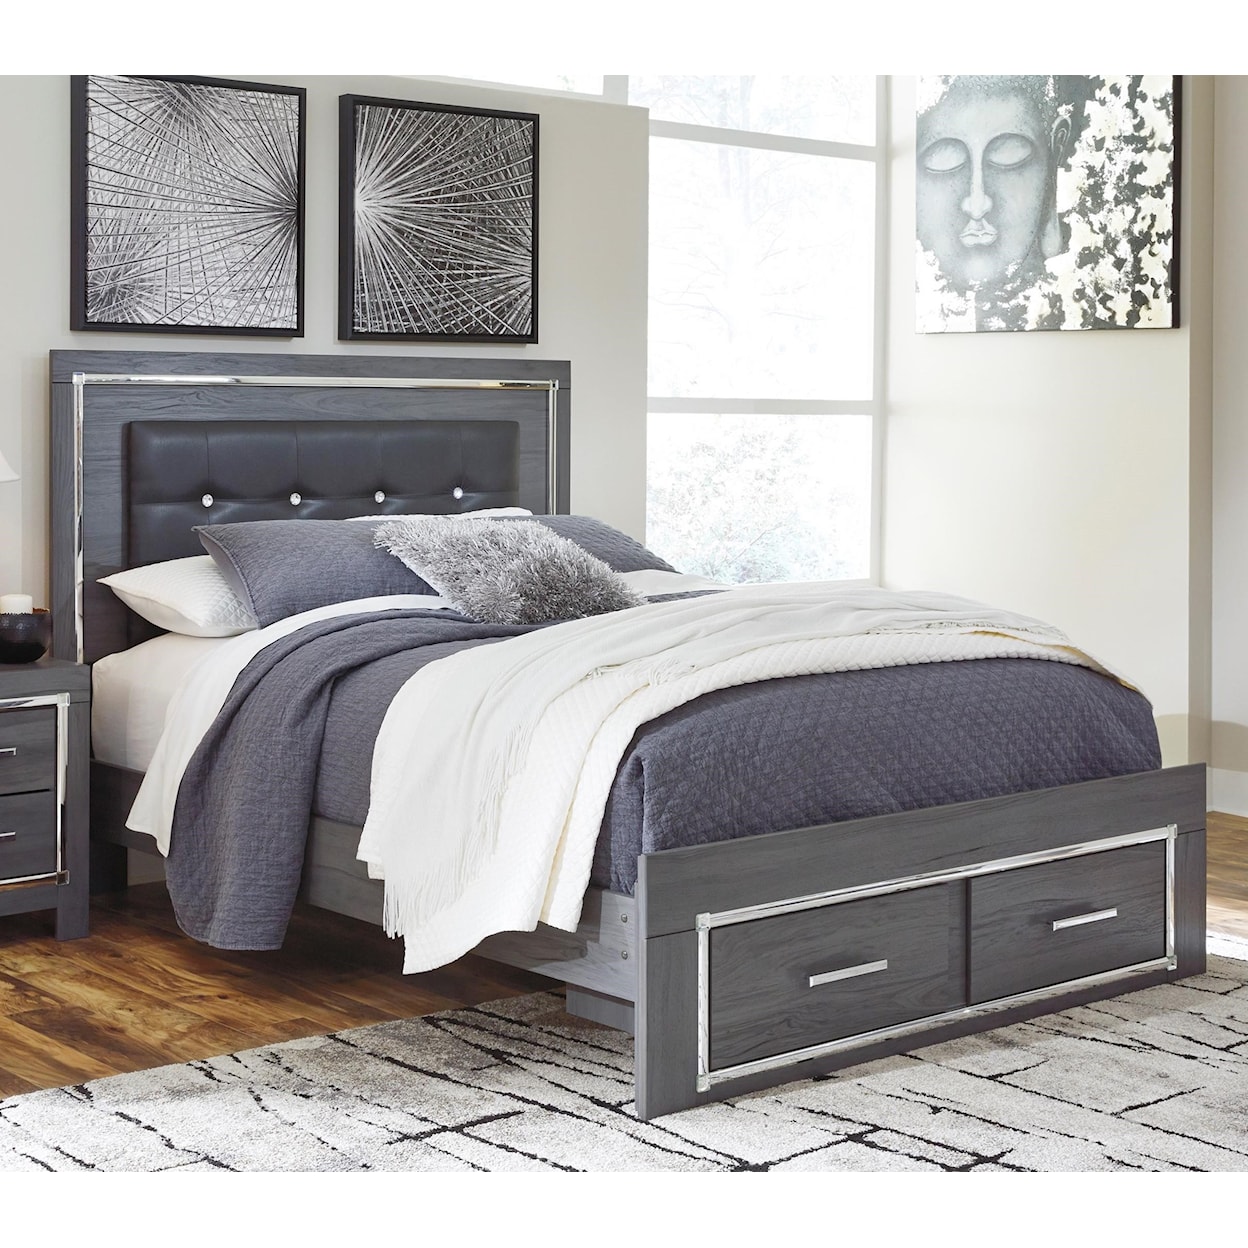 Ashley Signature Design Lodanna Queen Upholstered Bed